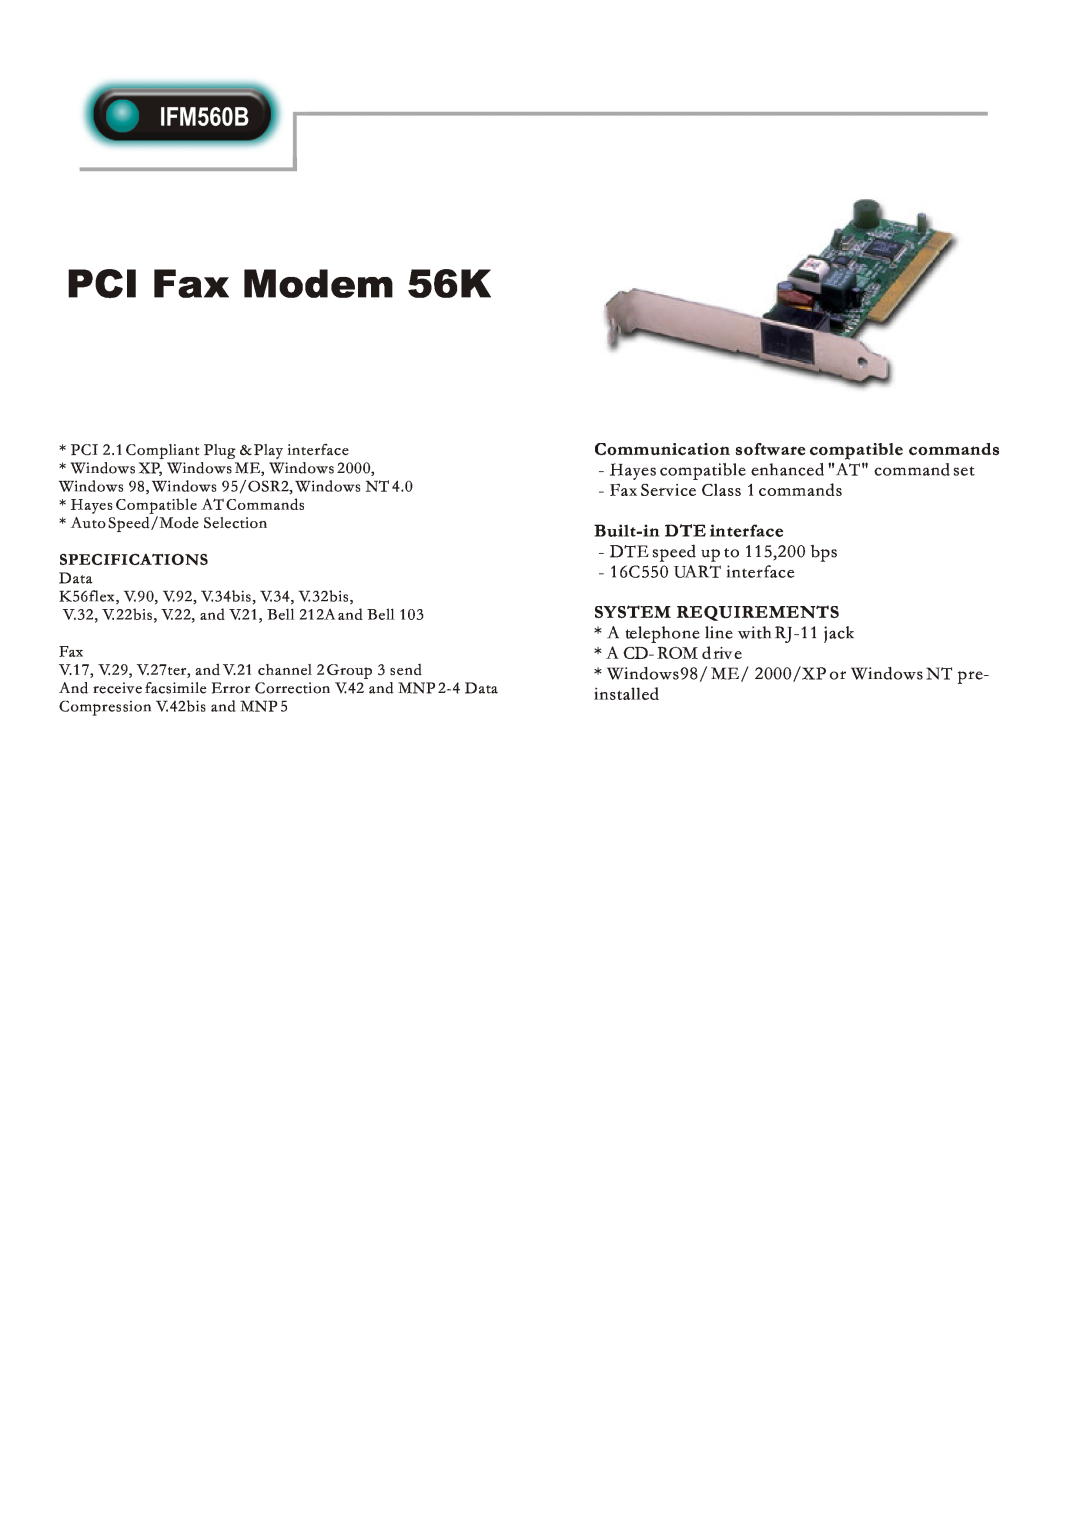 Abocom IFM560B specifications PCI Fax Modem 56K, Communication software compatible commands, Built-in DTE interface 